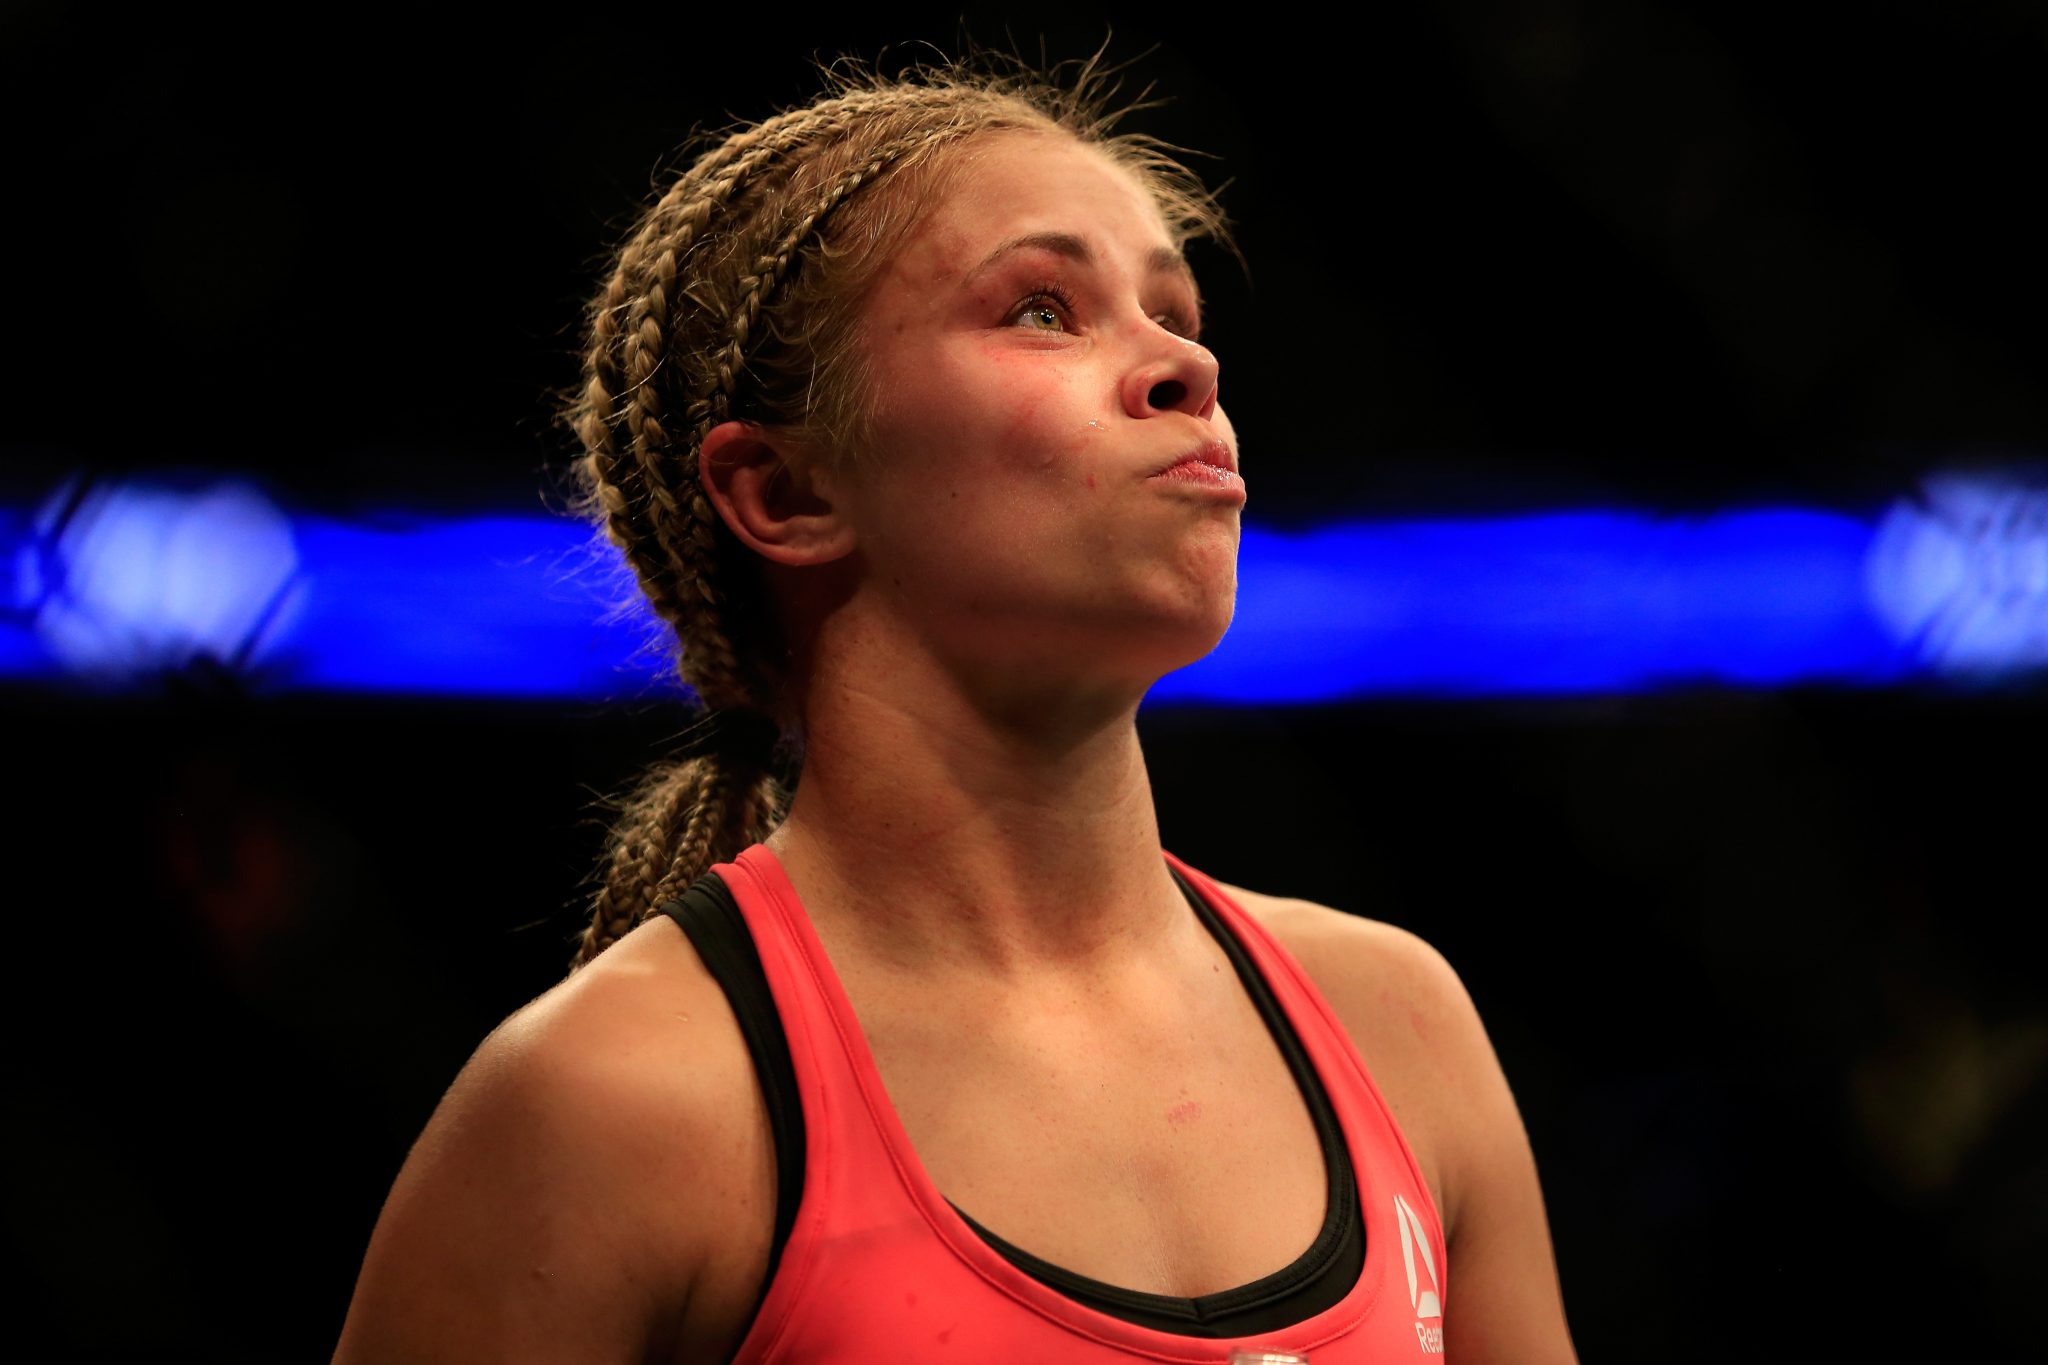 Paige VanZant 2023 Net Worth, Salary, Records, and Endorsements